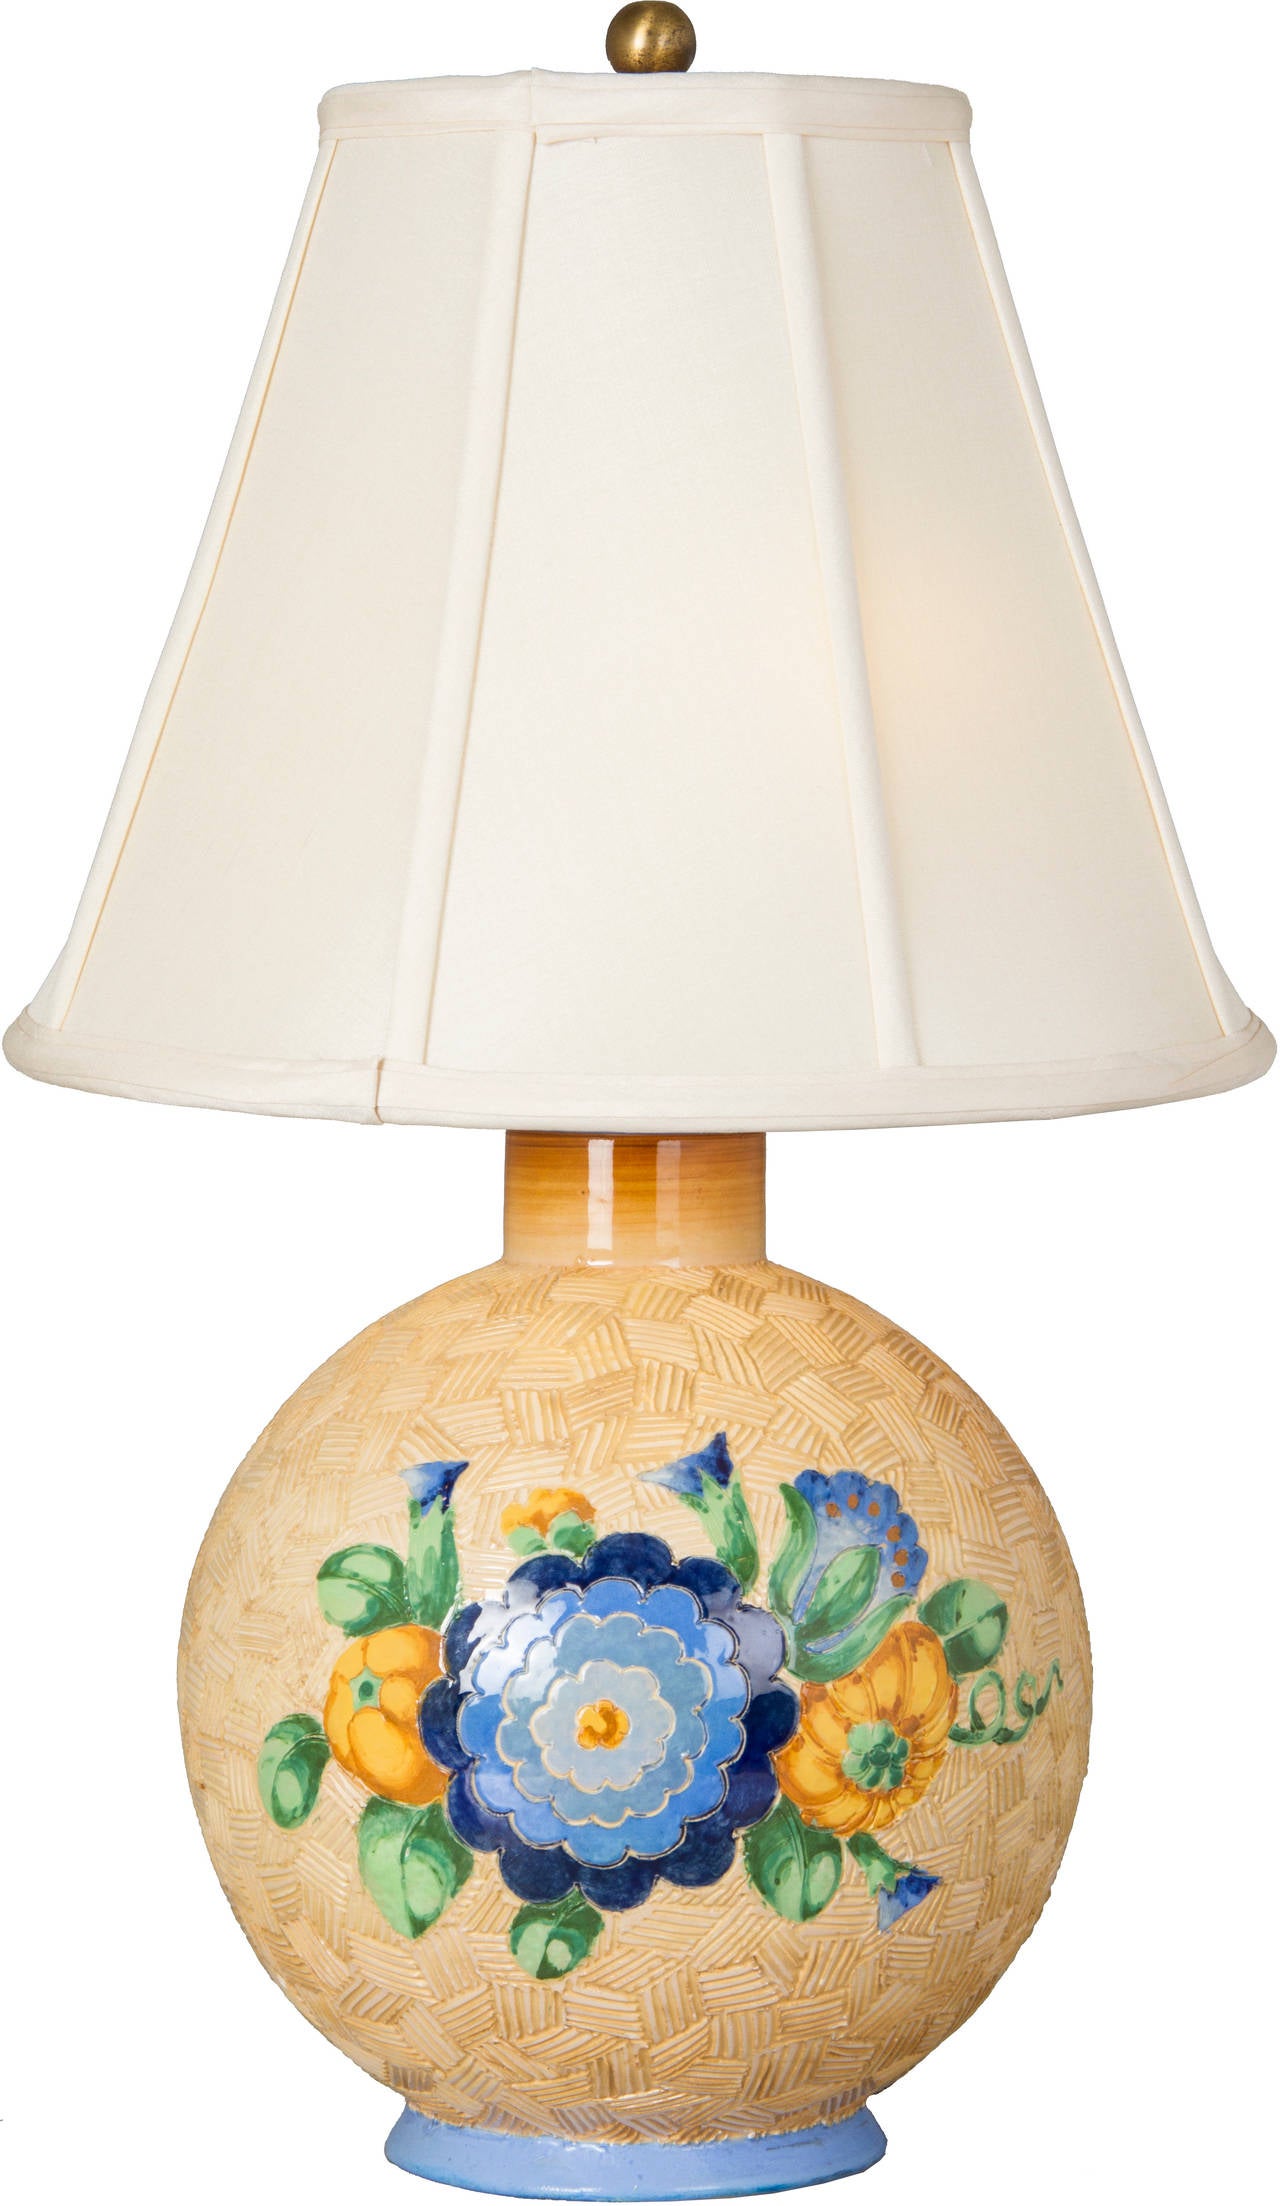 This lamp has an overall textural design and is decorated with a floral motif.